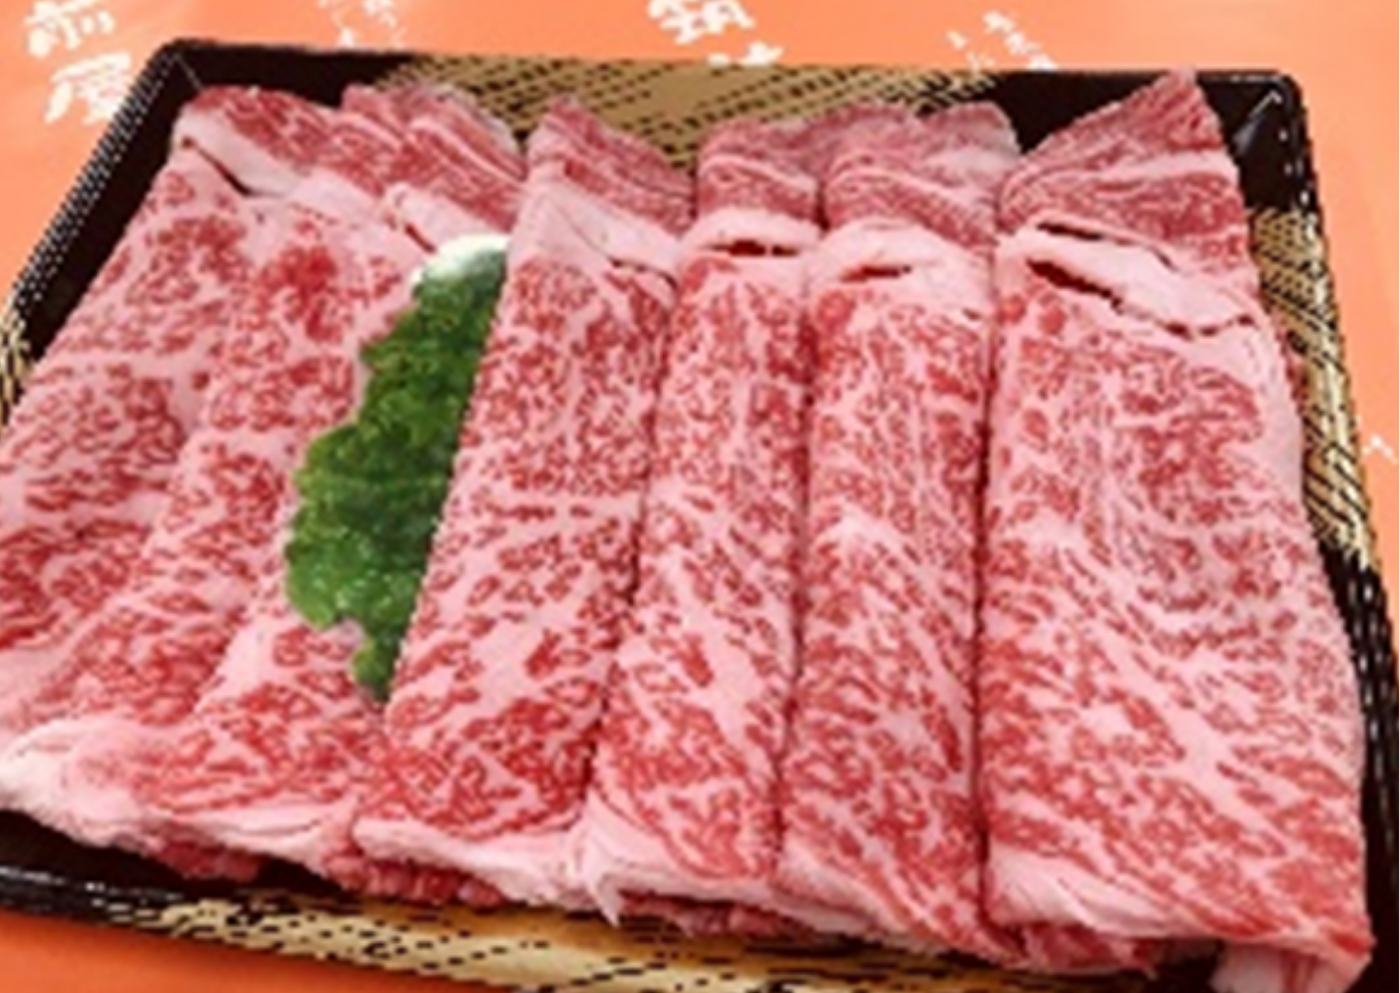 【A5A4等級使用】博多和牛ロース薄切り肉350g